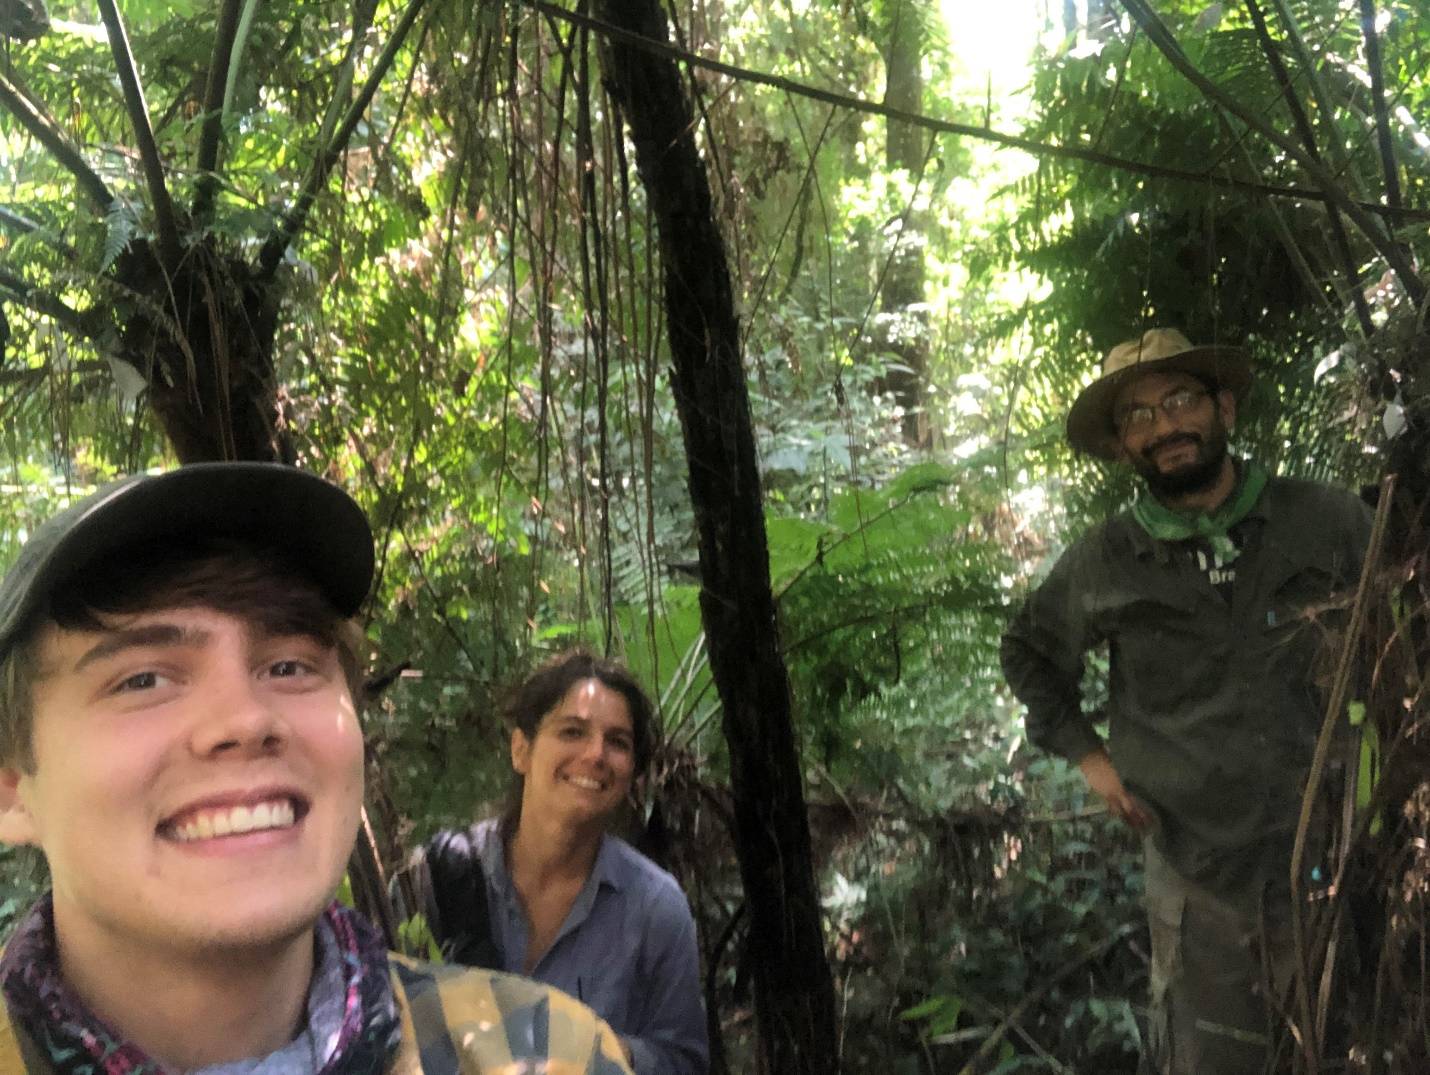 Agustina Yañez, Gonzalo Marquez, and I measuring the growth of tree ferns in Misiones, Argentina. The tallest we measured was over 5 meters tall!